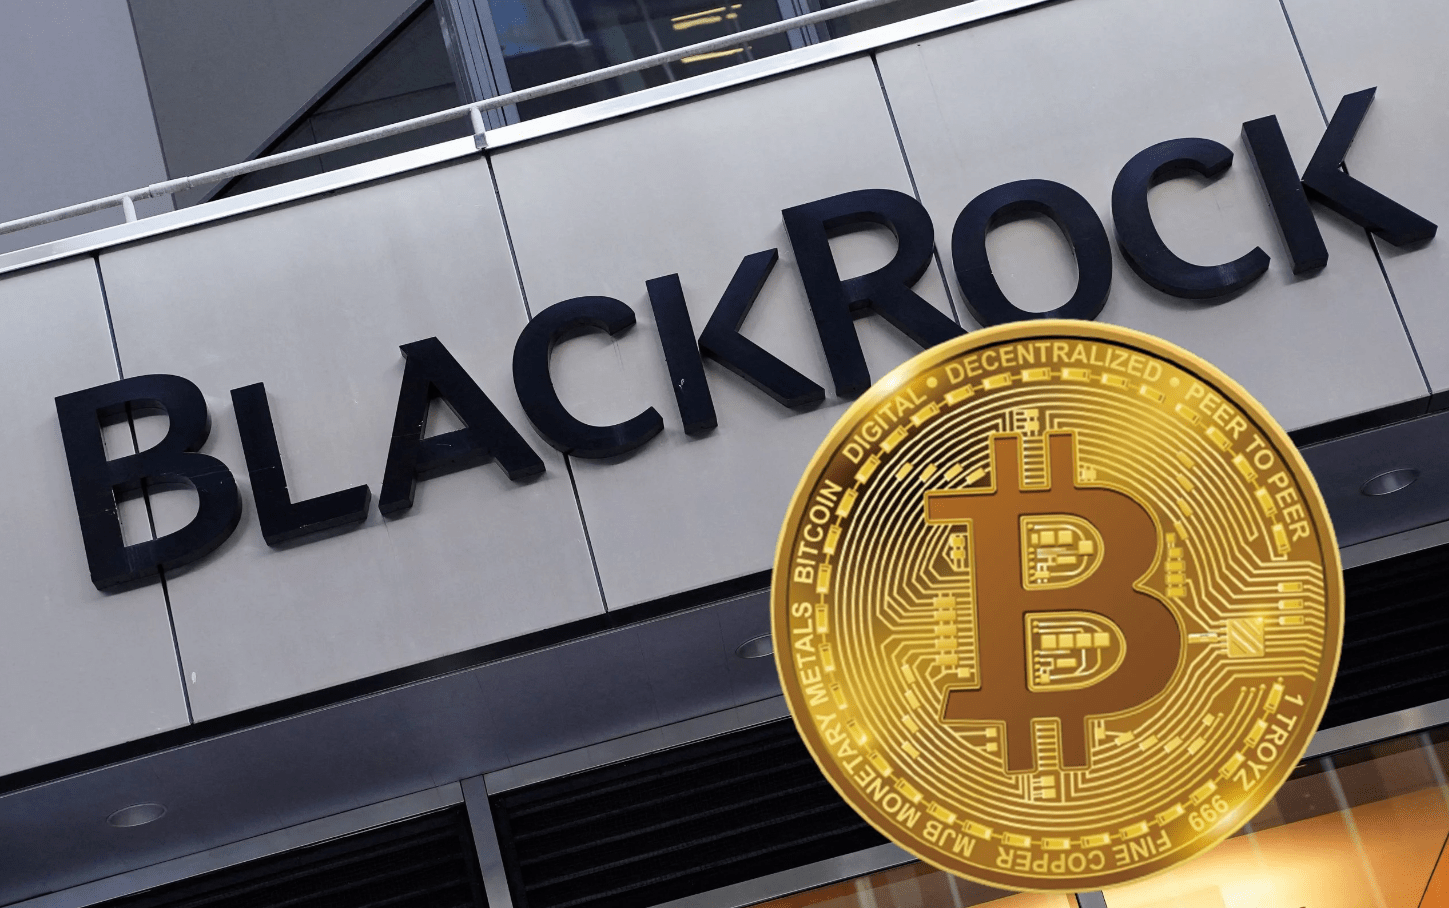 BlackRock ETF will be ‘big rubber yes stamp’ for Bitcoin: Interview with Charles Edwards